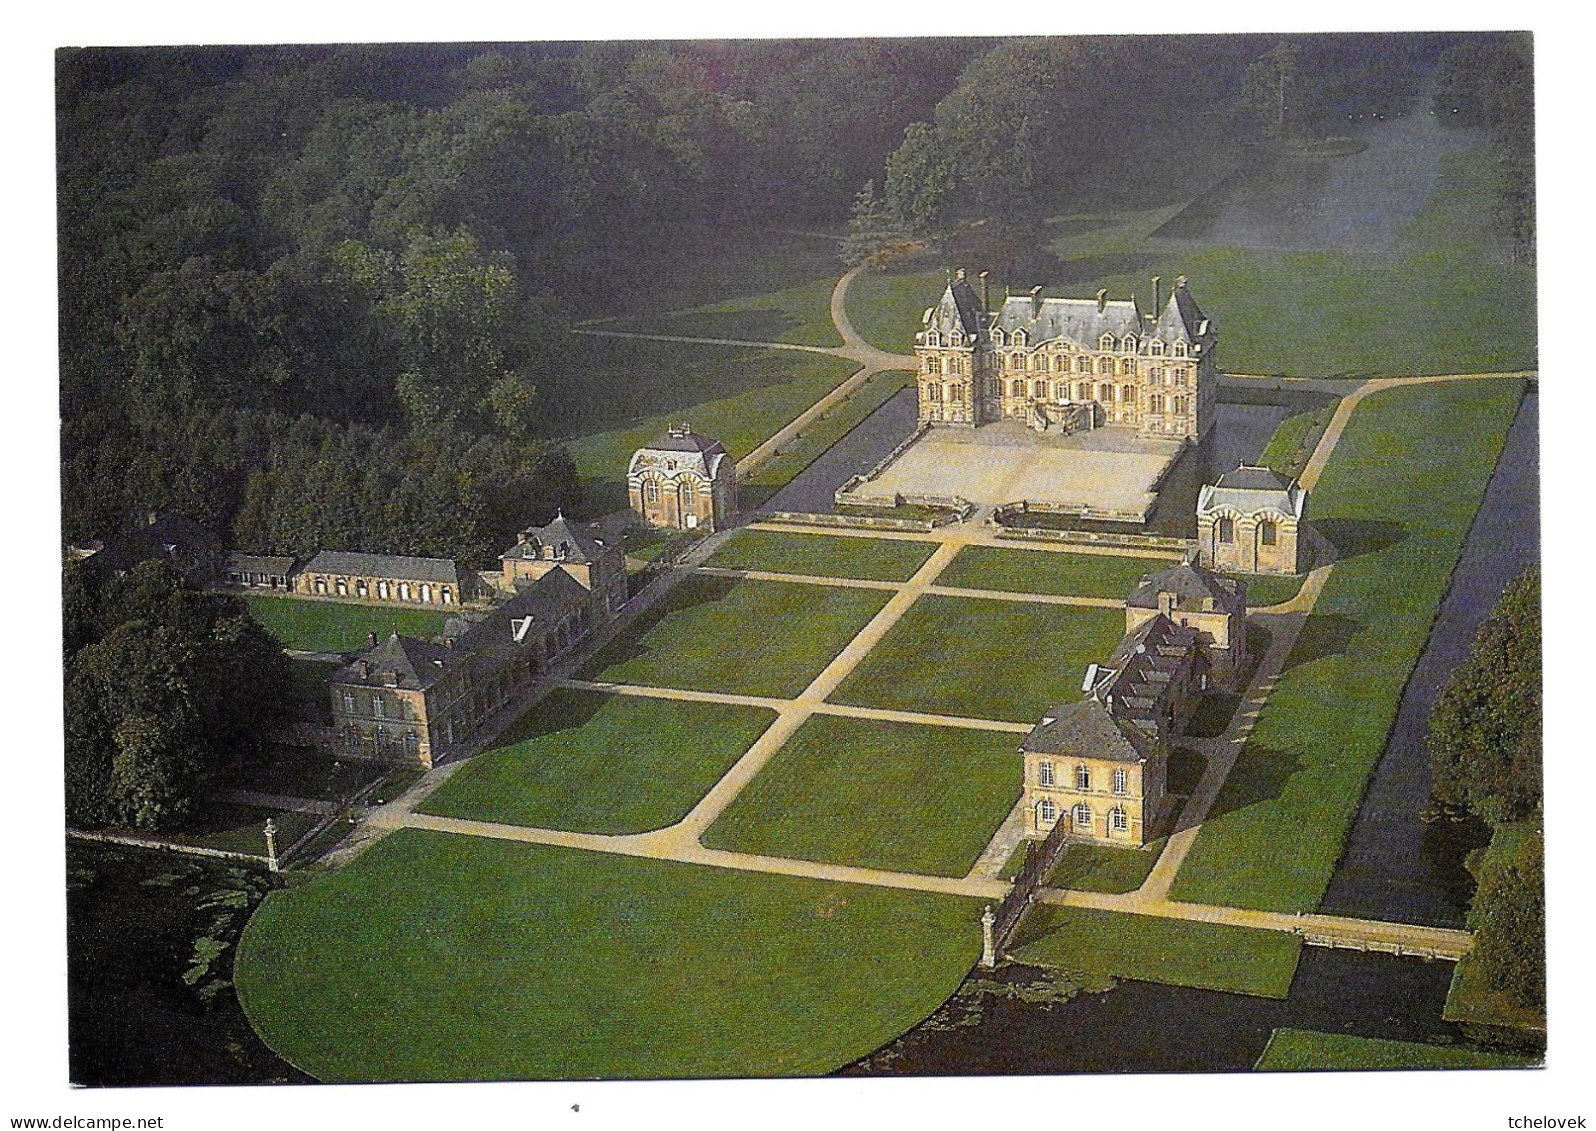 (76) . SM. Cany. (1) & (2) Chateau - Cany Barville